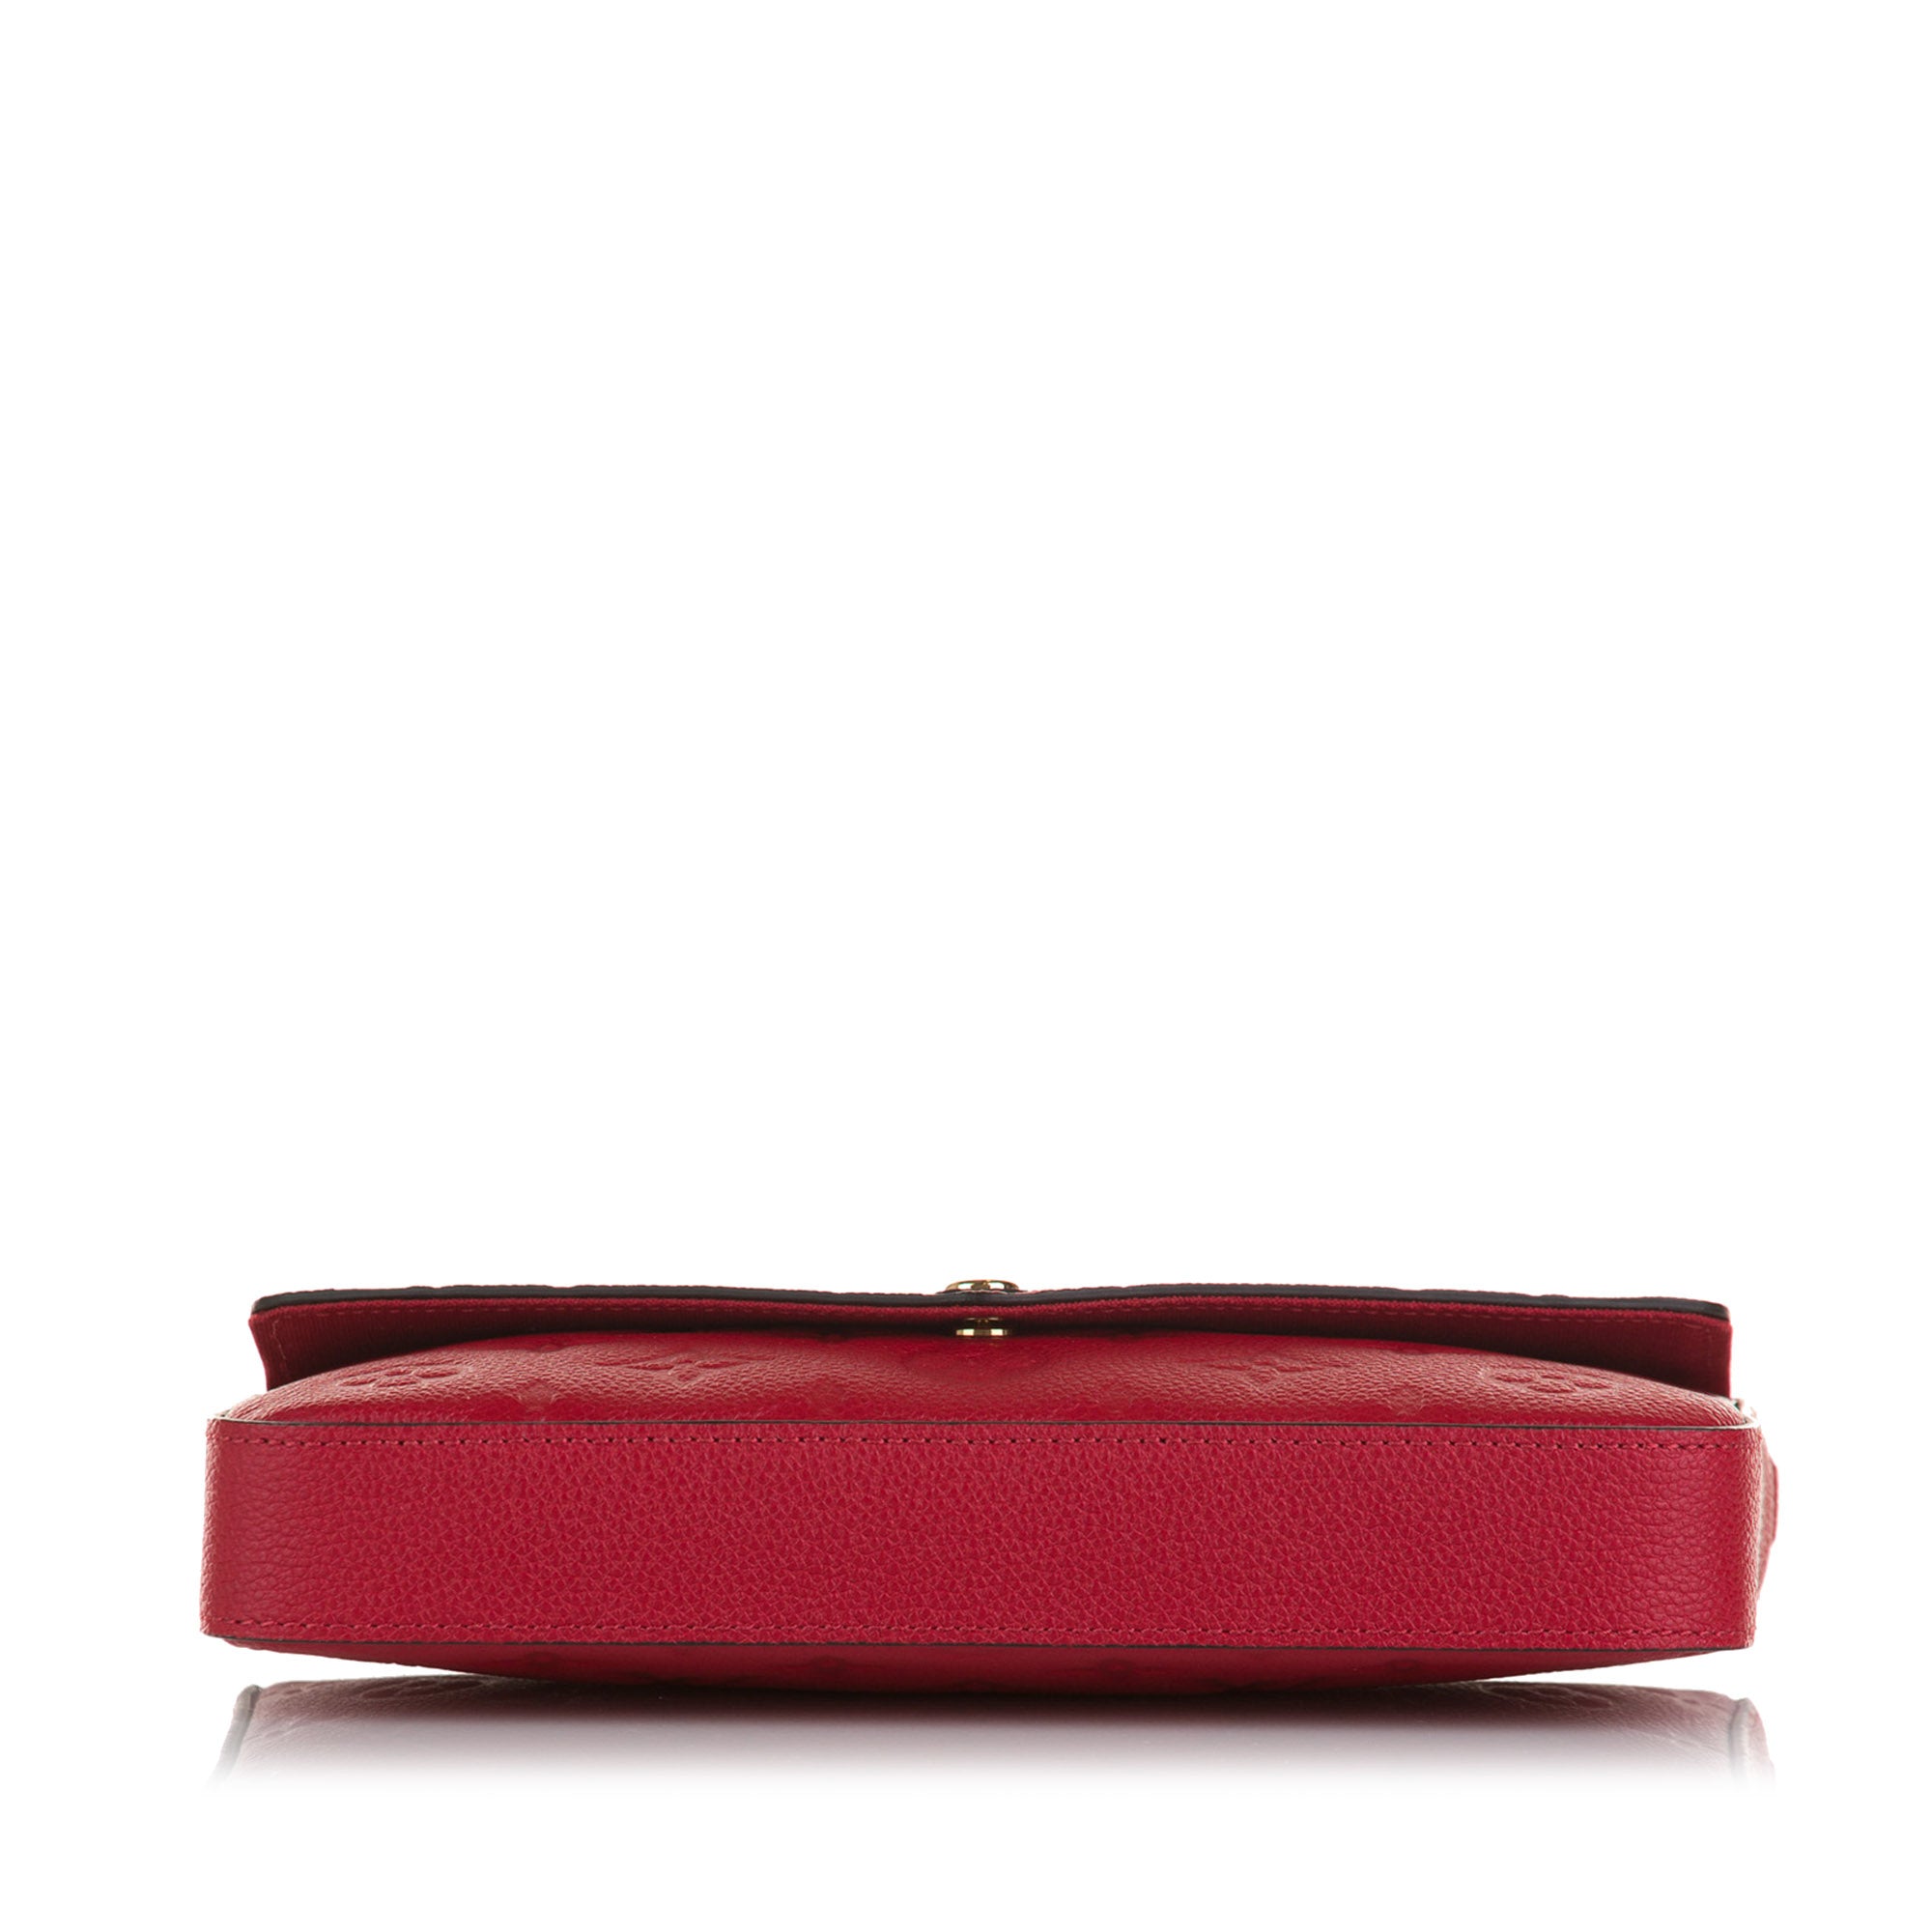 Louis Vuitton Felicie Pochette Epi Leather Red – The Pearl Branded Station